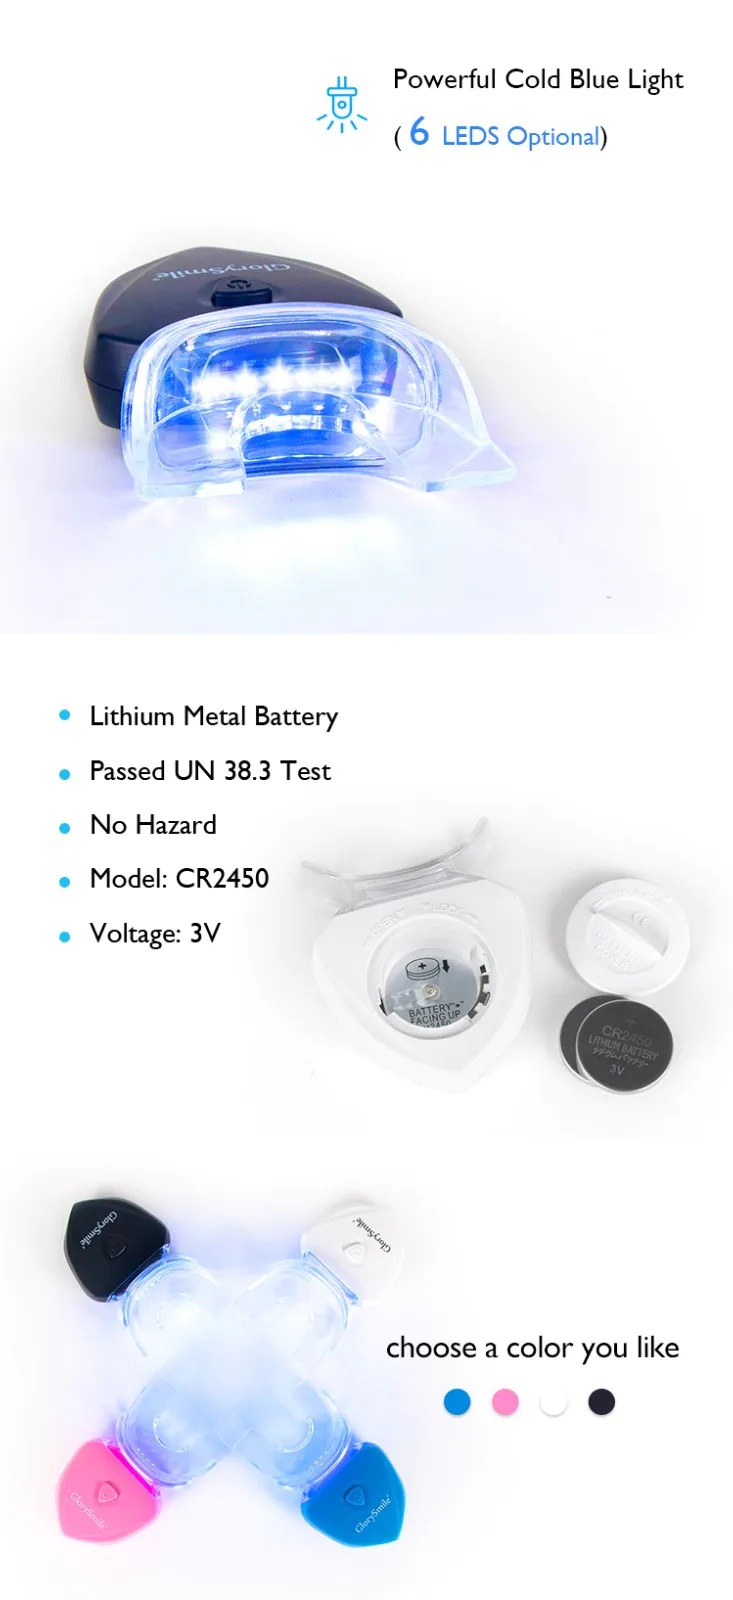 ODM professional teeth whitening kit at home factory for home usage